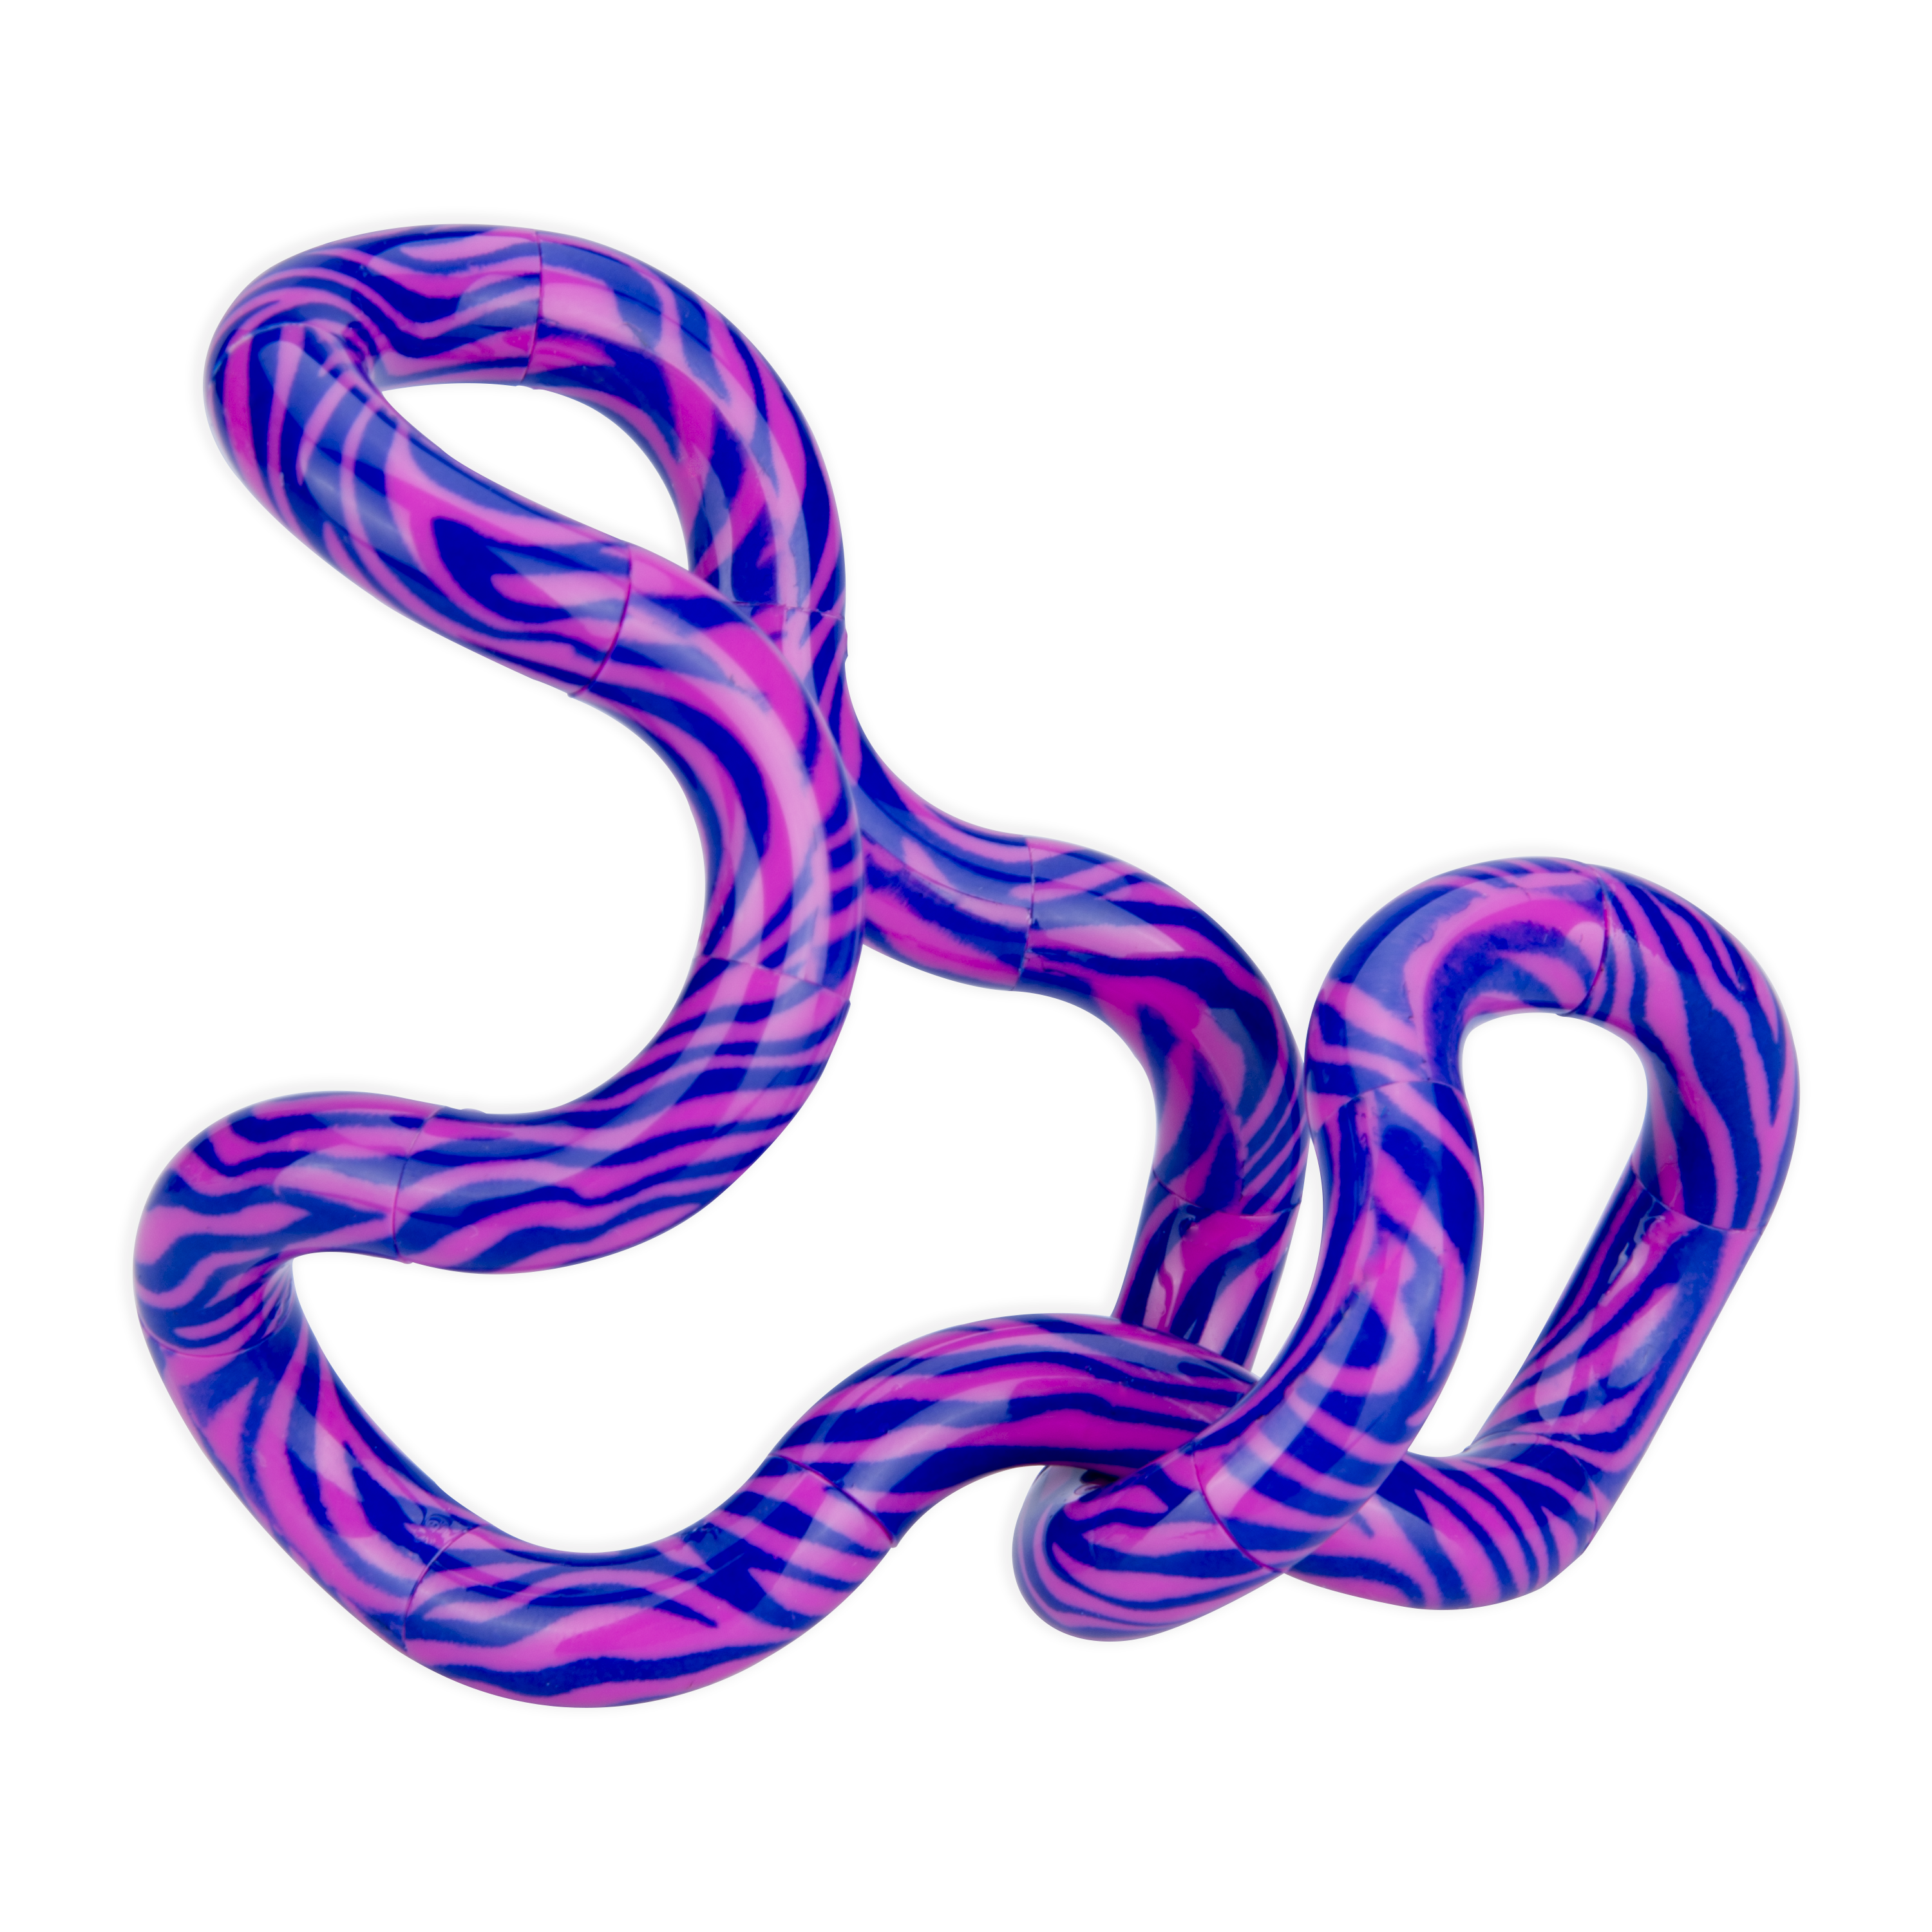 Tangle Wild | Tangled and Tangle toy